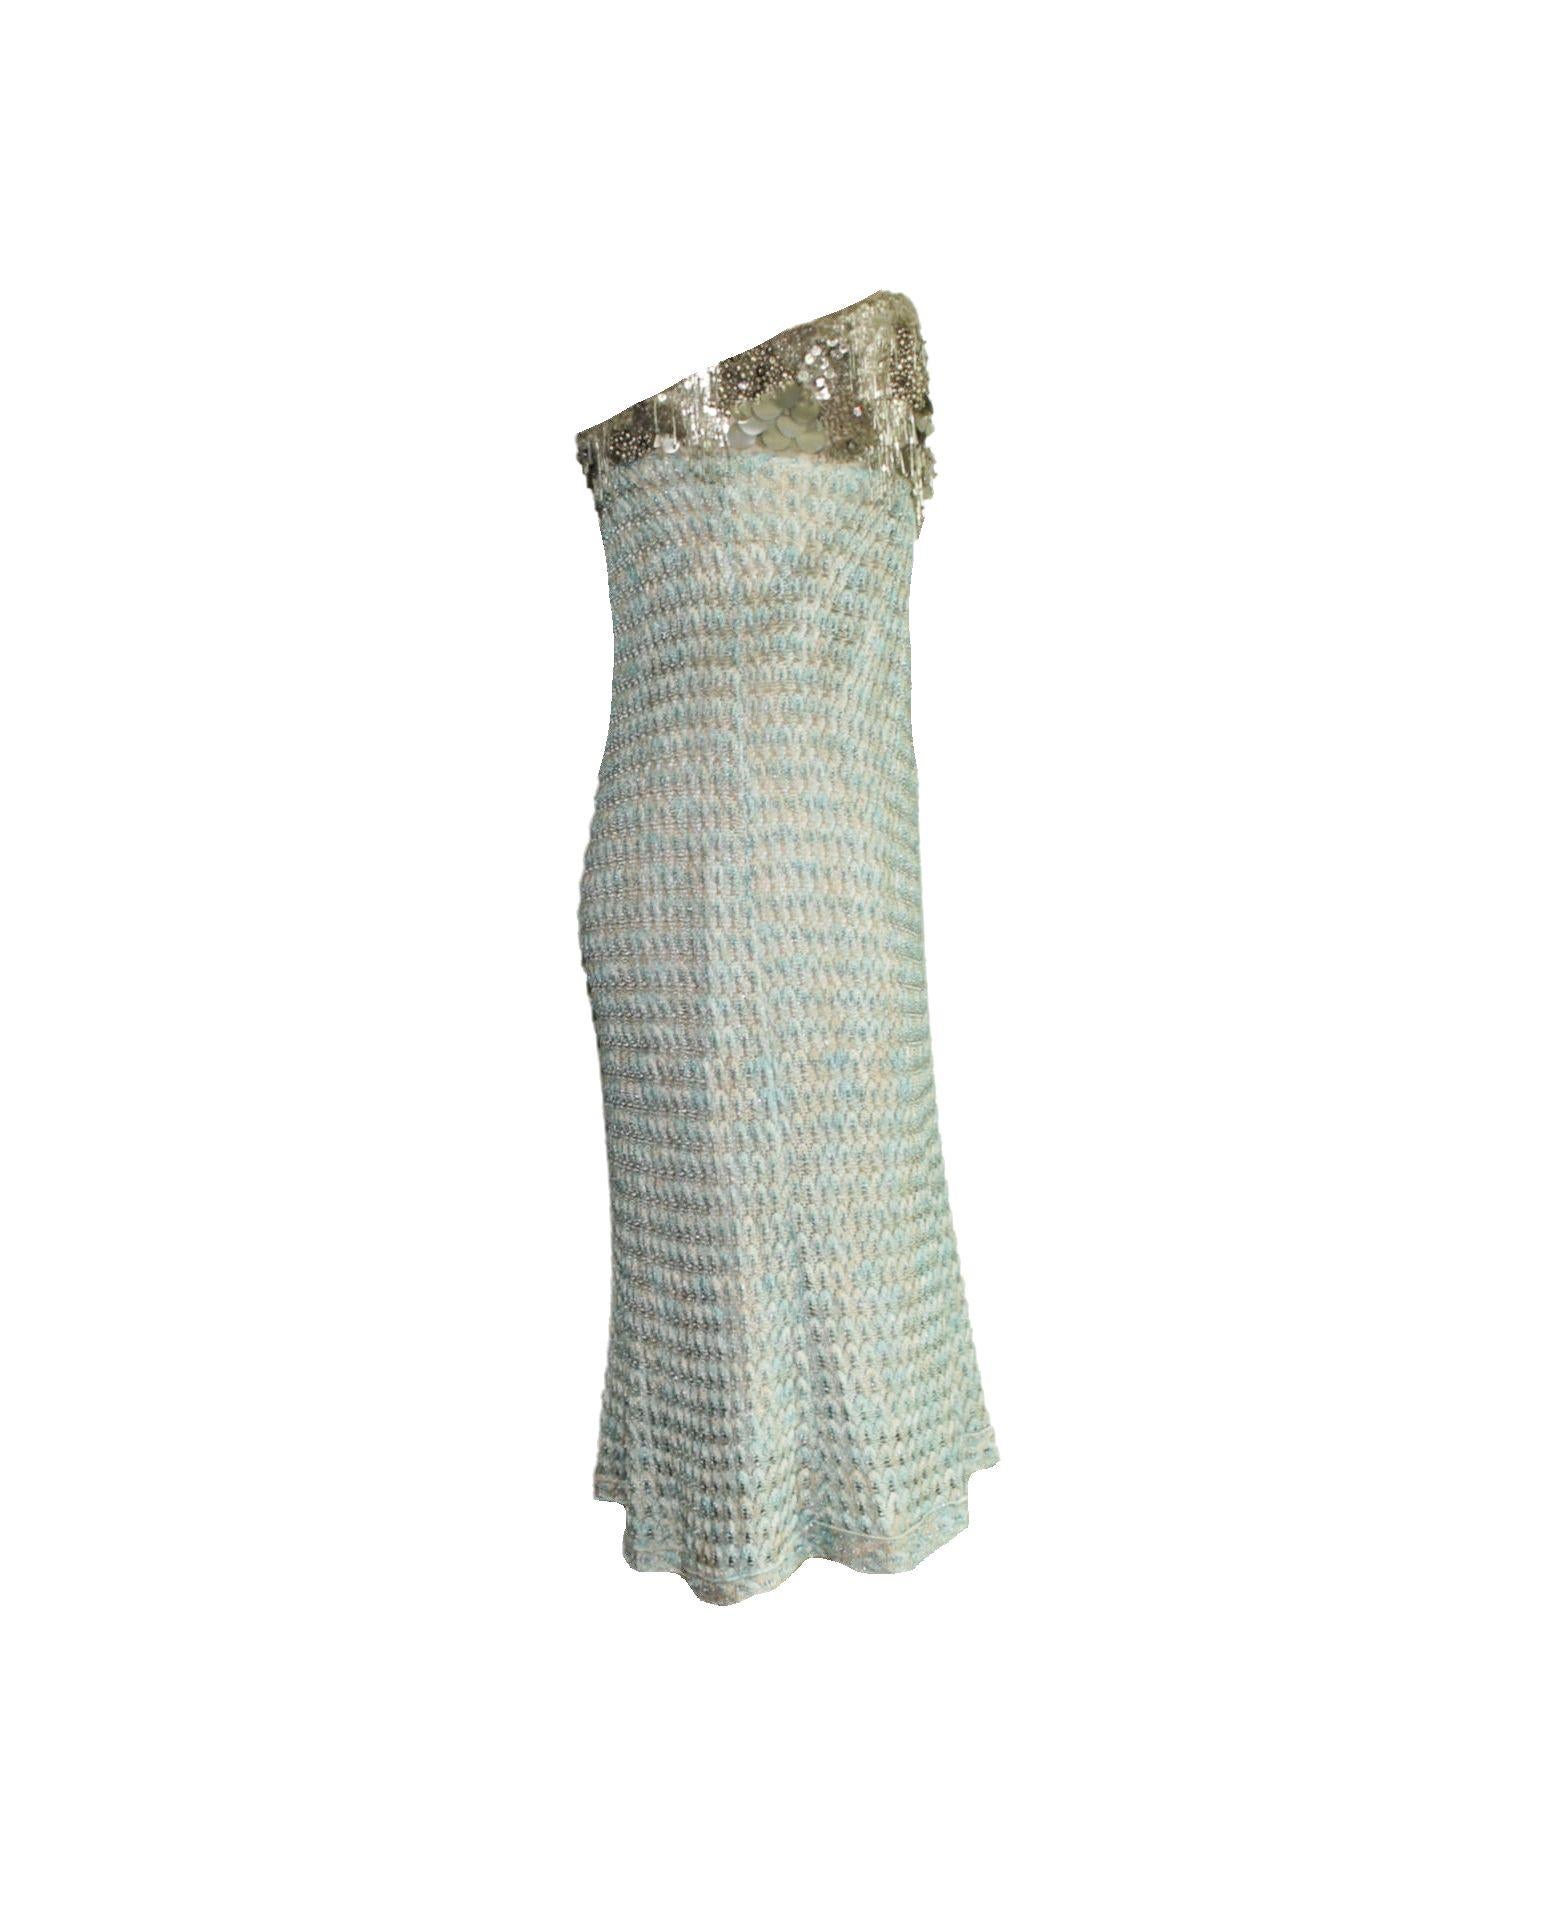 A stunning evening dress by MISSONI - a rare find!
Perfect for the festive season
Babyblue color with metallic silver lurex threads
Bustier corset top
Embellished top with sequins, pearls and crystals
Beautiful MISSONI signature crochet-knit